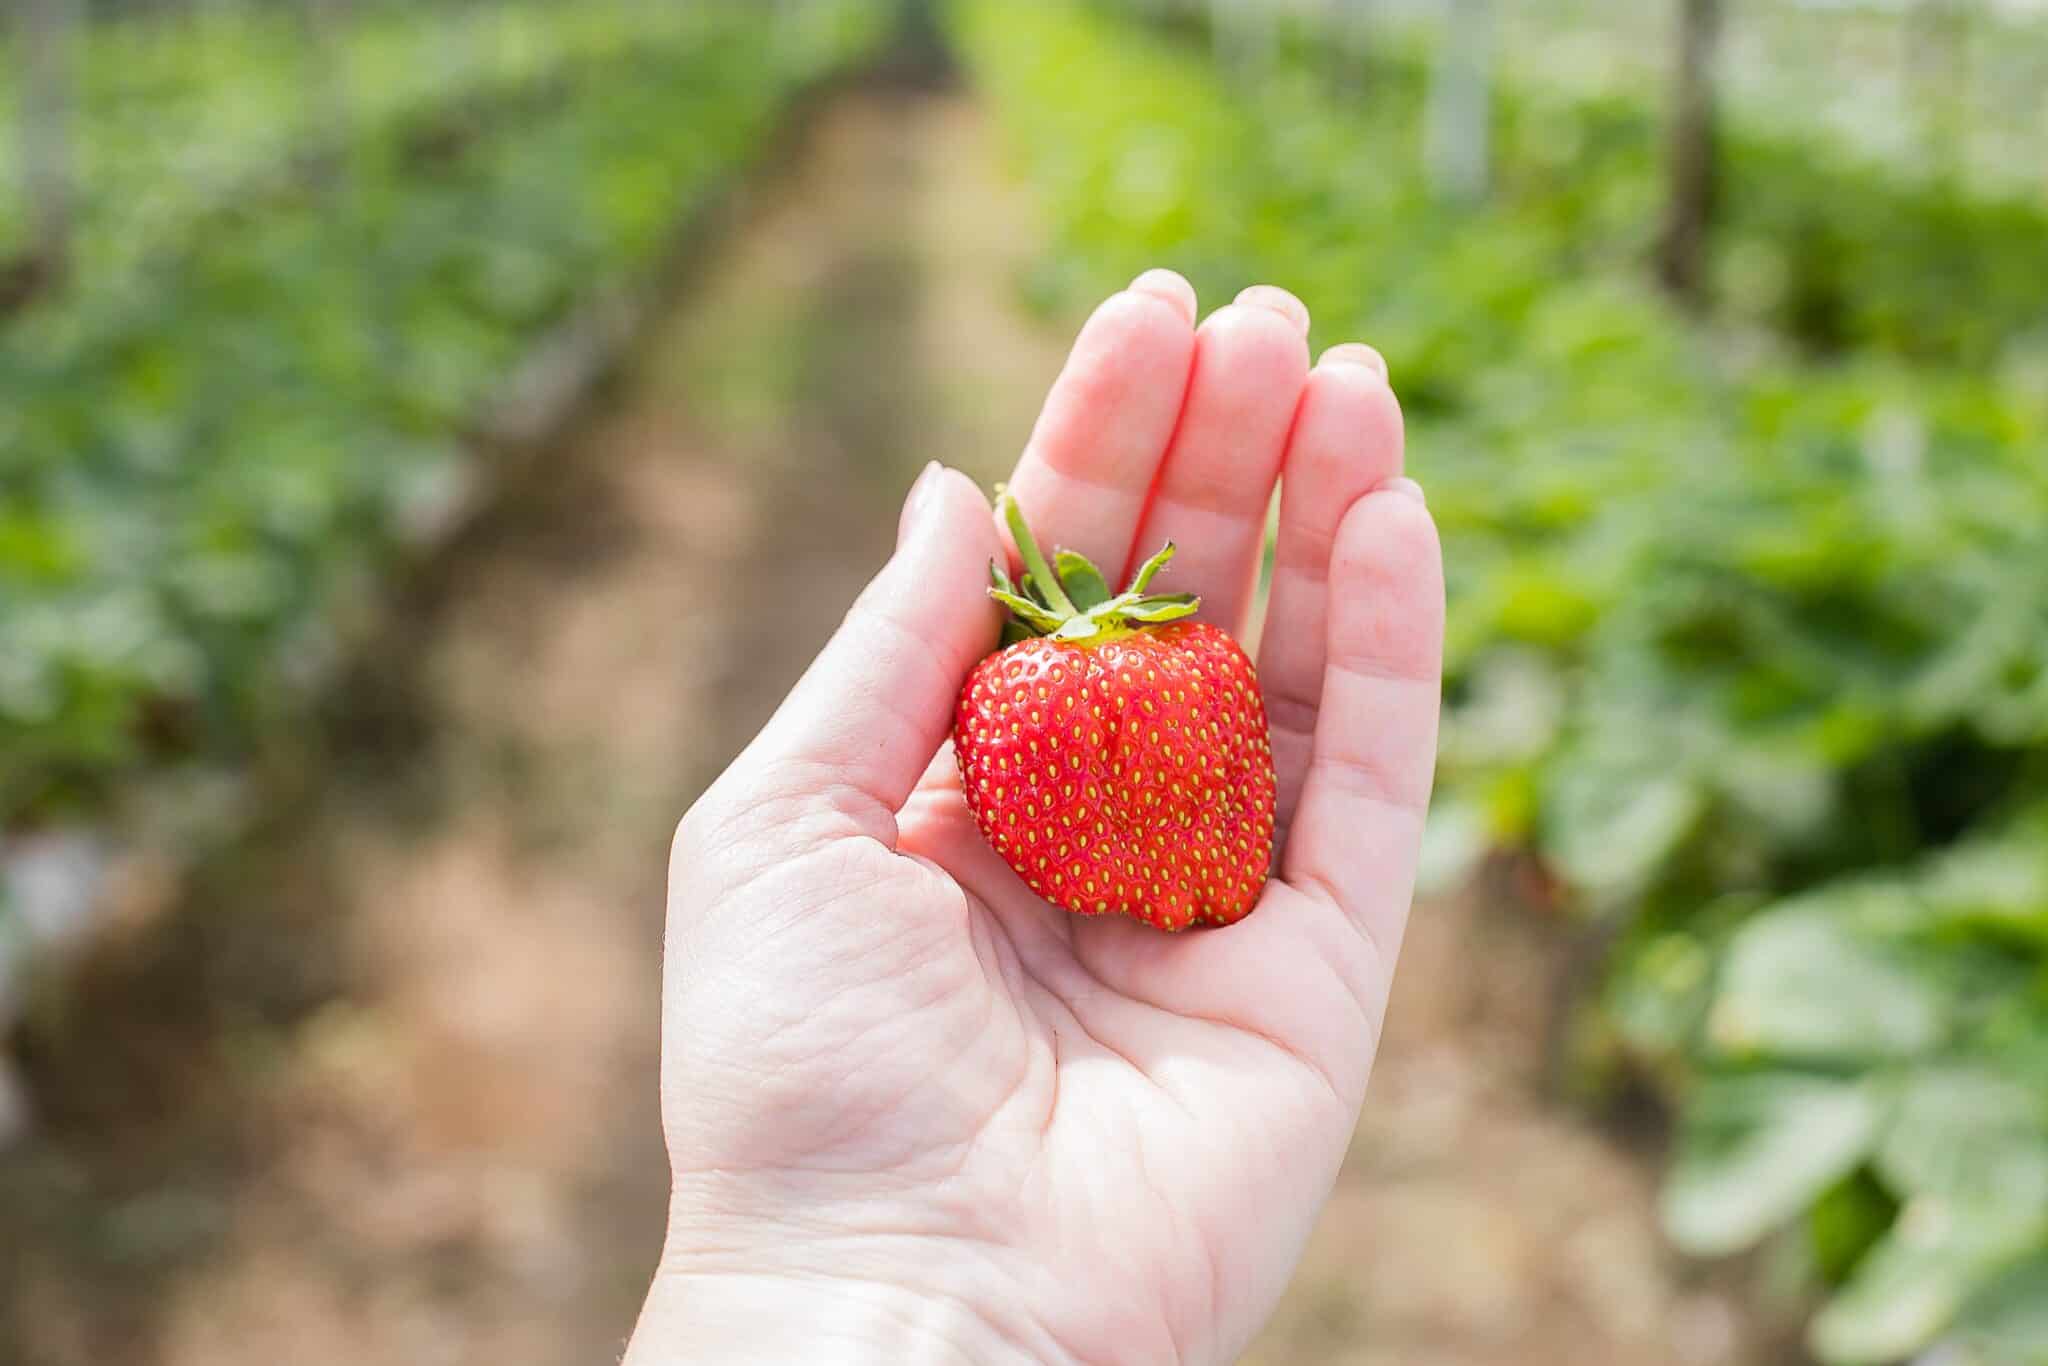 What is the difference between a mock strawberry and a normal strawberry?